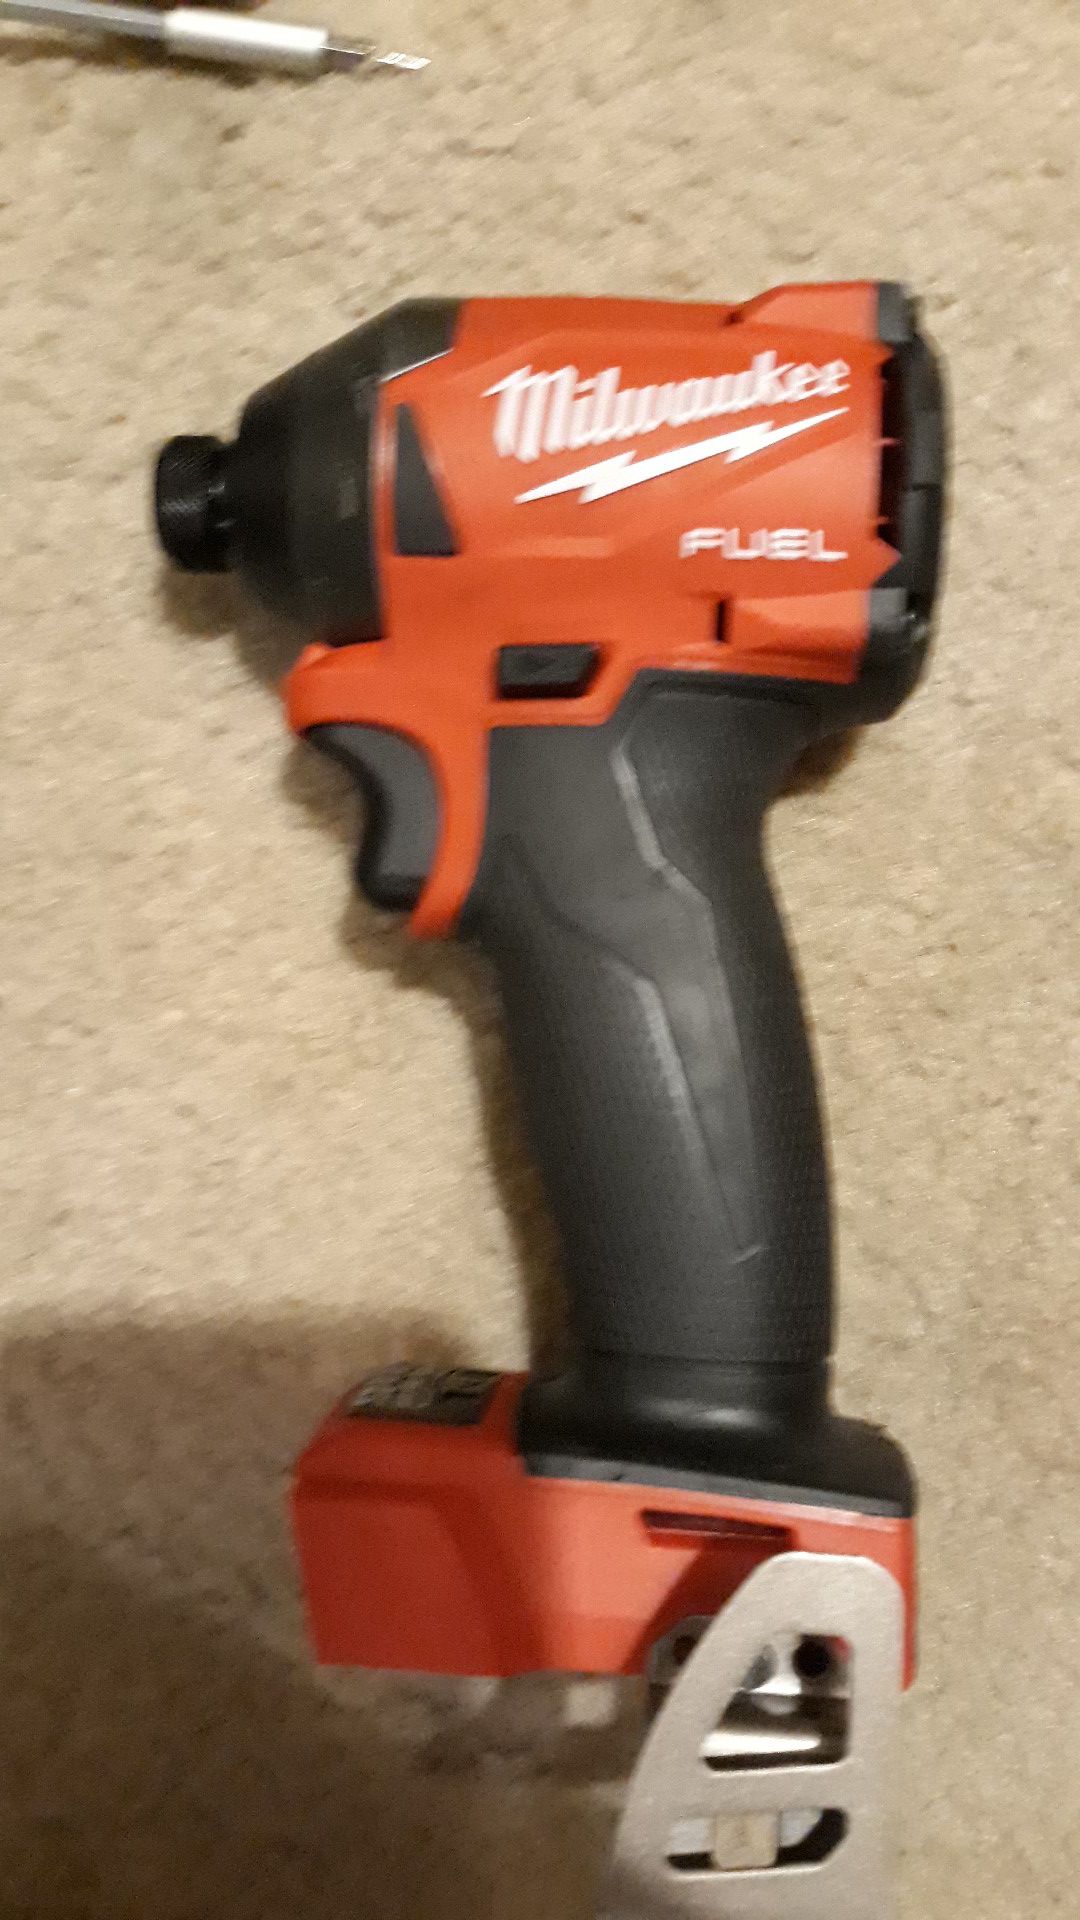 NEW 4 Speed Milwaukee m18 FUEL Brushless 18 Volt 1/4 Hex Impact Drill Driver 2020 Model BARE TOOL